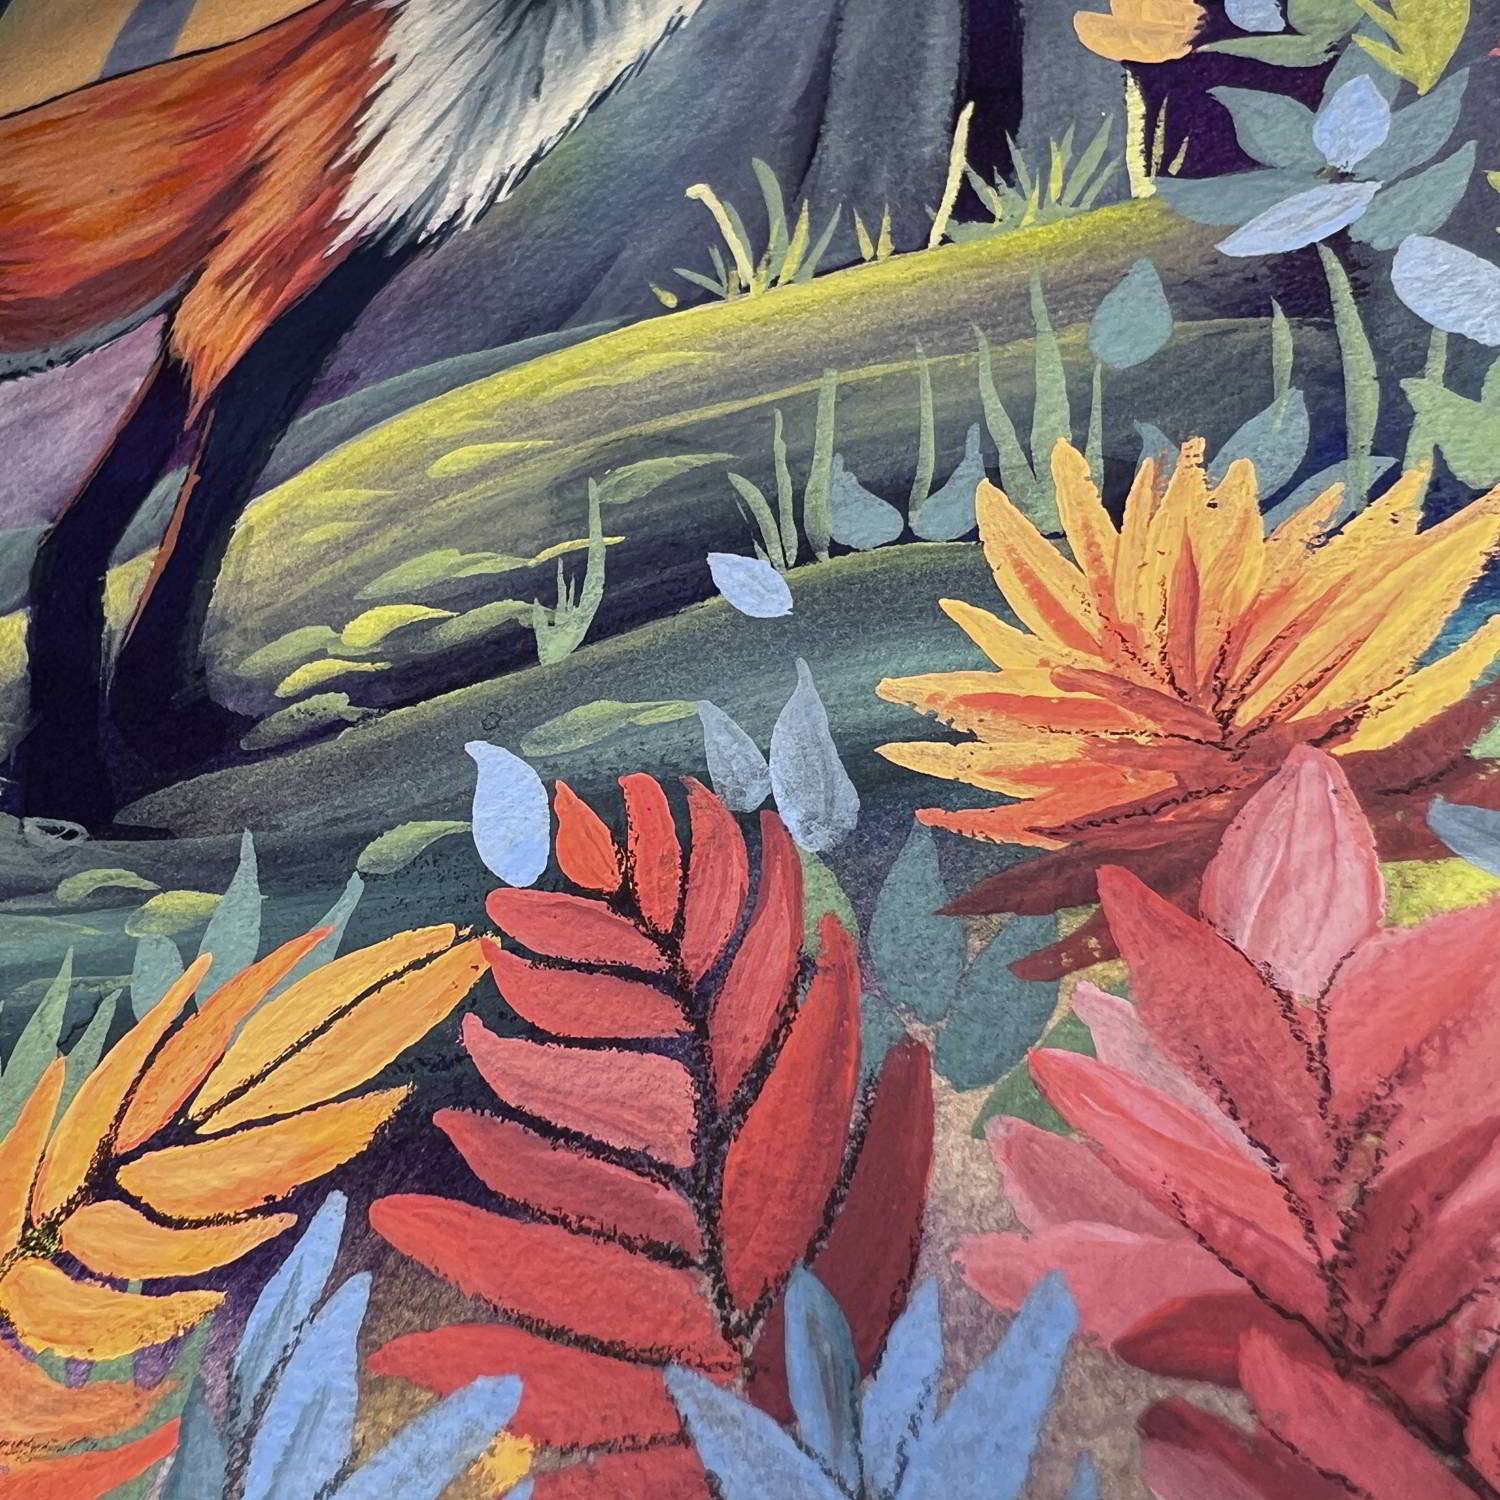 Detail of a fox painting showing the gradient twilight background and autumnal leaves.